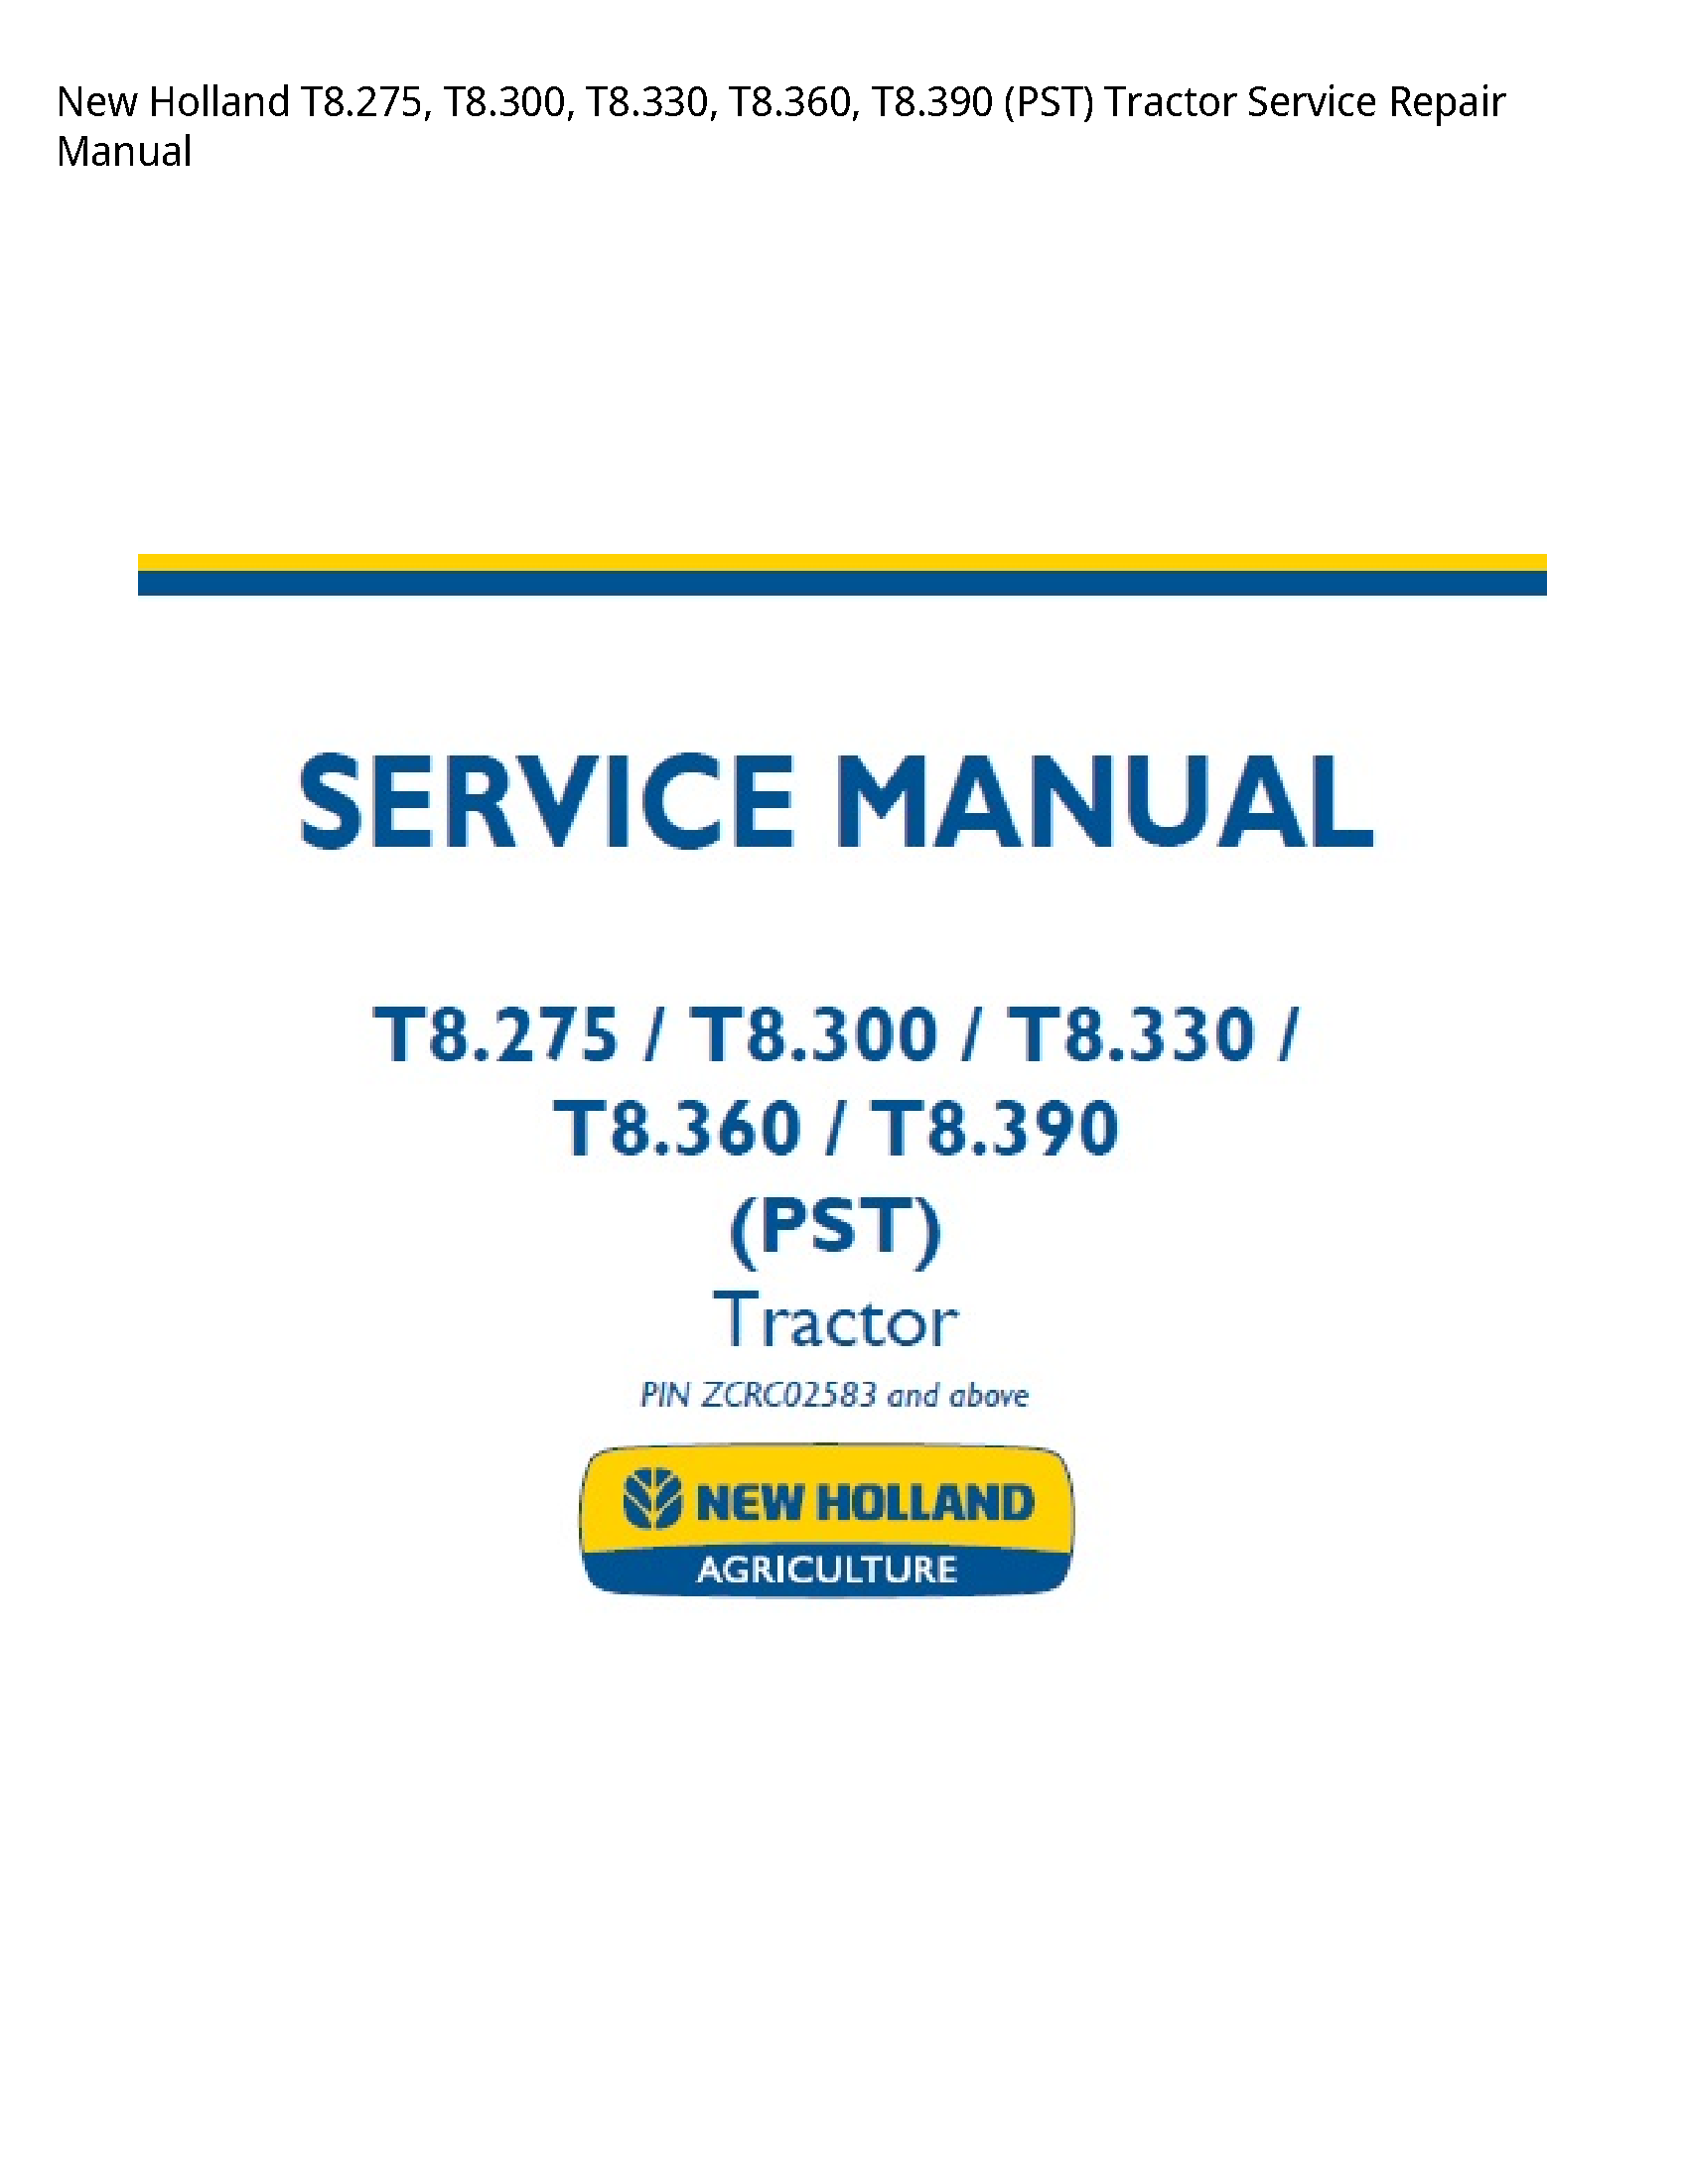 New Holland T8.275 (PST) Tractor manual